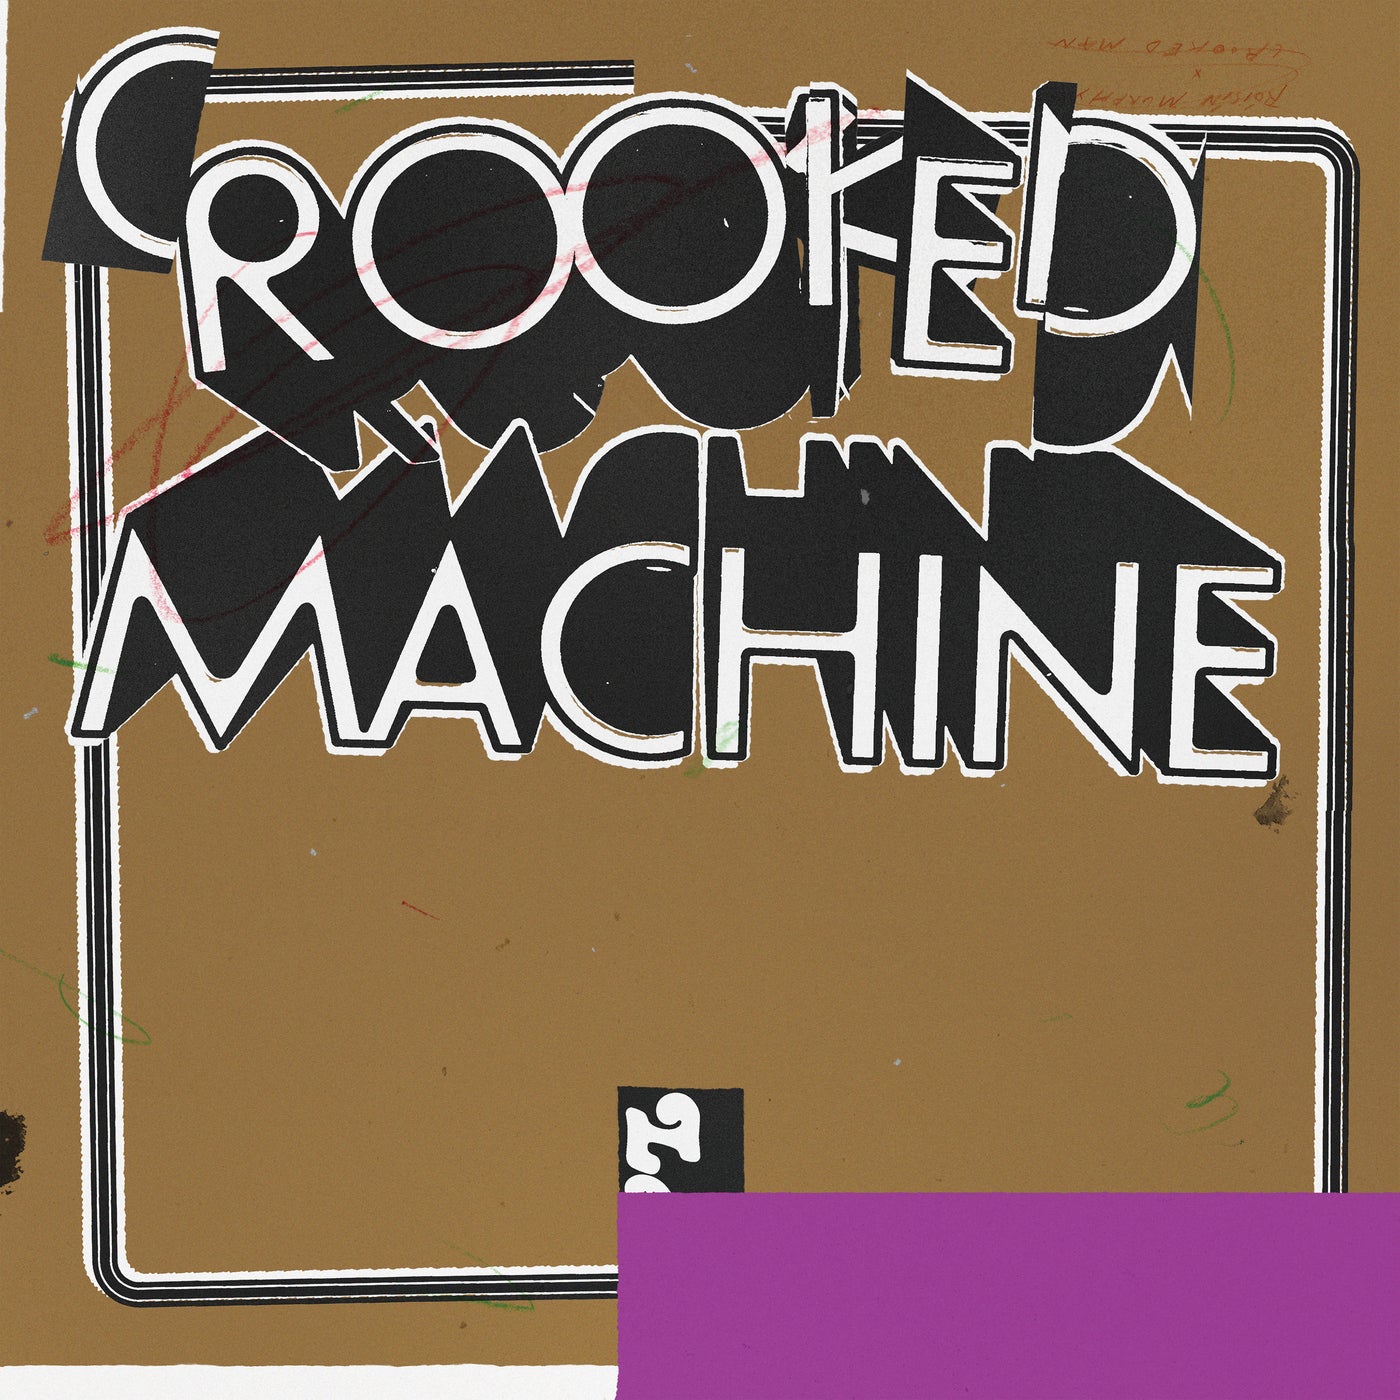 Download Crooked Machine on Electrobuzz